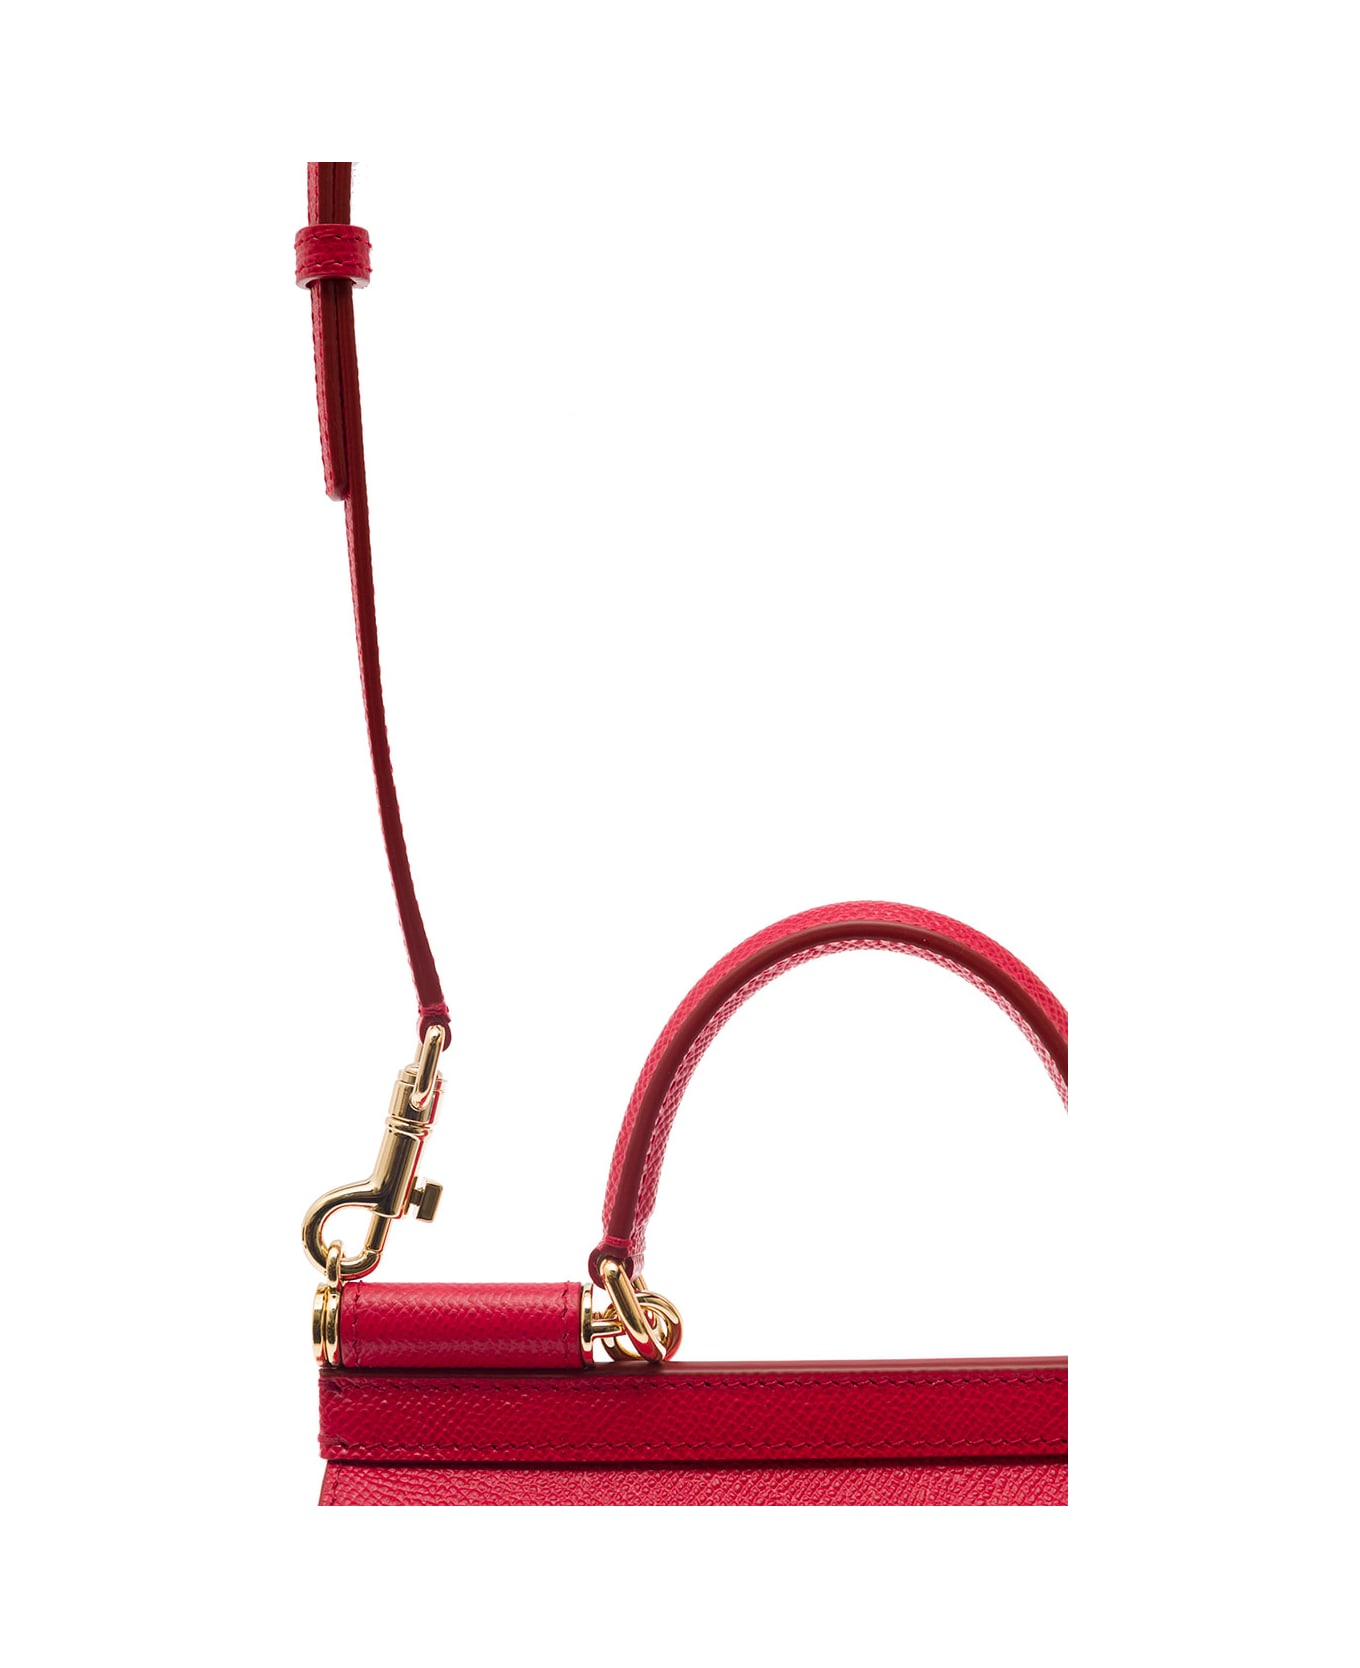 Dolce & Gabbana Sicily Dauphine Handbag In Red Leather Woman - Red トートバッグ